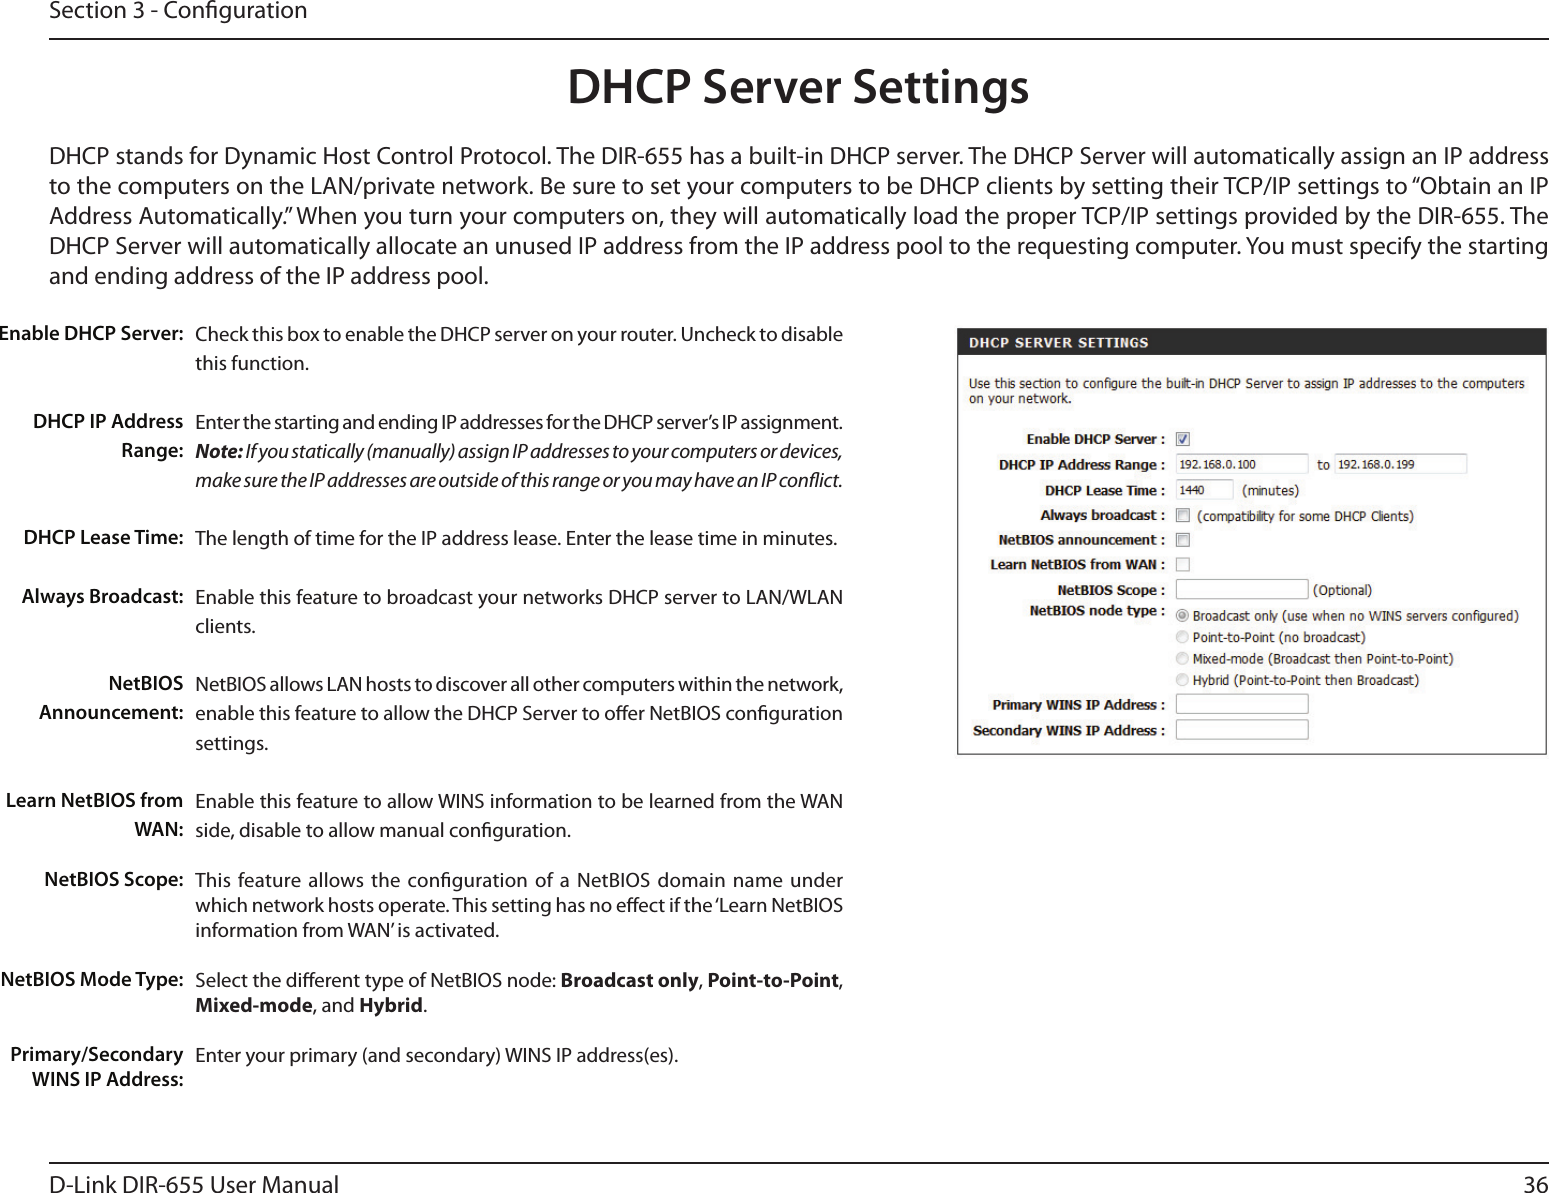 36D-Link DIR-655 User ManualSection 3 - CongurationDHCP Server SettingsDHCP stands for Dynamic Host Control Protocol. The DIR-655 has a built-in DHCP server. The DHCP Server will automatically assign an IP address to the computers on the LAN/private network. Be sure to set your computers to be DHCP clients by setting their TCP/IP settings to “Obtain an IP Address Automatically.” When you turn your computers on, they will automatically load the proper TCP/IP settings provided by the DIR-655. The DHCP Server will automatically allocate an unused IP address from the IP address pool to the requesting computer. You must specify the starting and ending address of the IP address pool.Check this box to enable the DHCP server on your router. Uncheck to disable this function.Enter the starting and ending IP addresses for the DHCP server’s IP assignment.Note: If you statically (manually) assign IP addresses to your computers or devices, make sure the IP addresses are outside of this range or you may have an IP conict. The length of time for the IP address lease. Enter the lease time in minutes.Enable this feature to broadcast your networks DHCP server to LAN/WLAN clients.NetBIOS allows LAN hosts to discover all other computers within the network, enable this feature to allow the DHCP Server to oer NetBIOS conguration settings.Enable this feature to allow WINS information to be learned from the WAN side, disable to allow manual conguration.This  feature allows  the  conguration  of a  NetBIOS  domain  name  under which network hosts operate. This setting has no eect if the ‘Learn NetBIOS information from WAN’ is activated.Select the dierent type of NetBIOS node: Broadcast only, Point-to-Point, Mixed-mode, and Hybrid.Enter your primary (and secondary) WINS IP address(es).Enable DHCP Server:DHCP IP Address Range:DHCP Lease Time:Always Broadcast:NetBIOS Announcement:Learn NetBIOS from WAN:NetBIOS Scope:NetBIOS Mode Type:Primary/Secondary WINS IP Address: